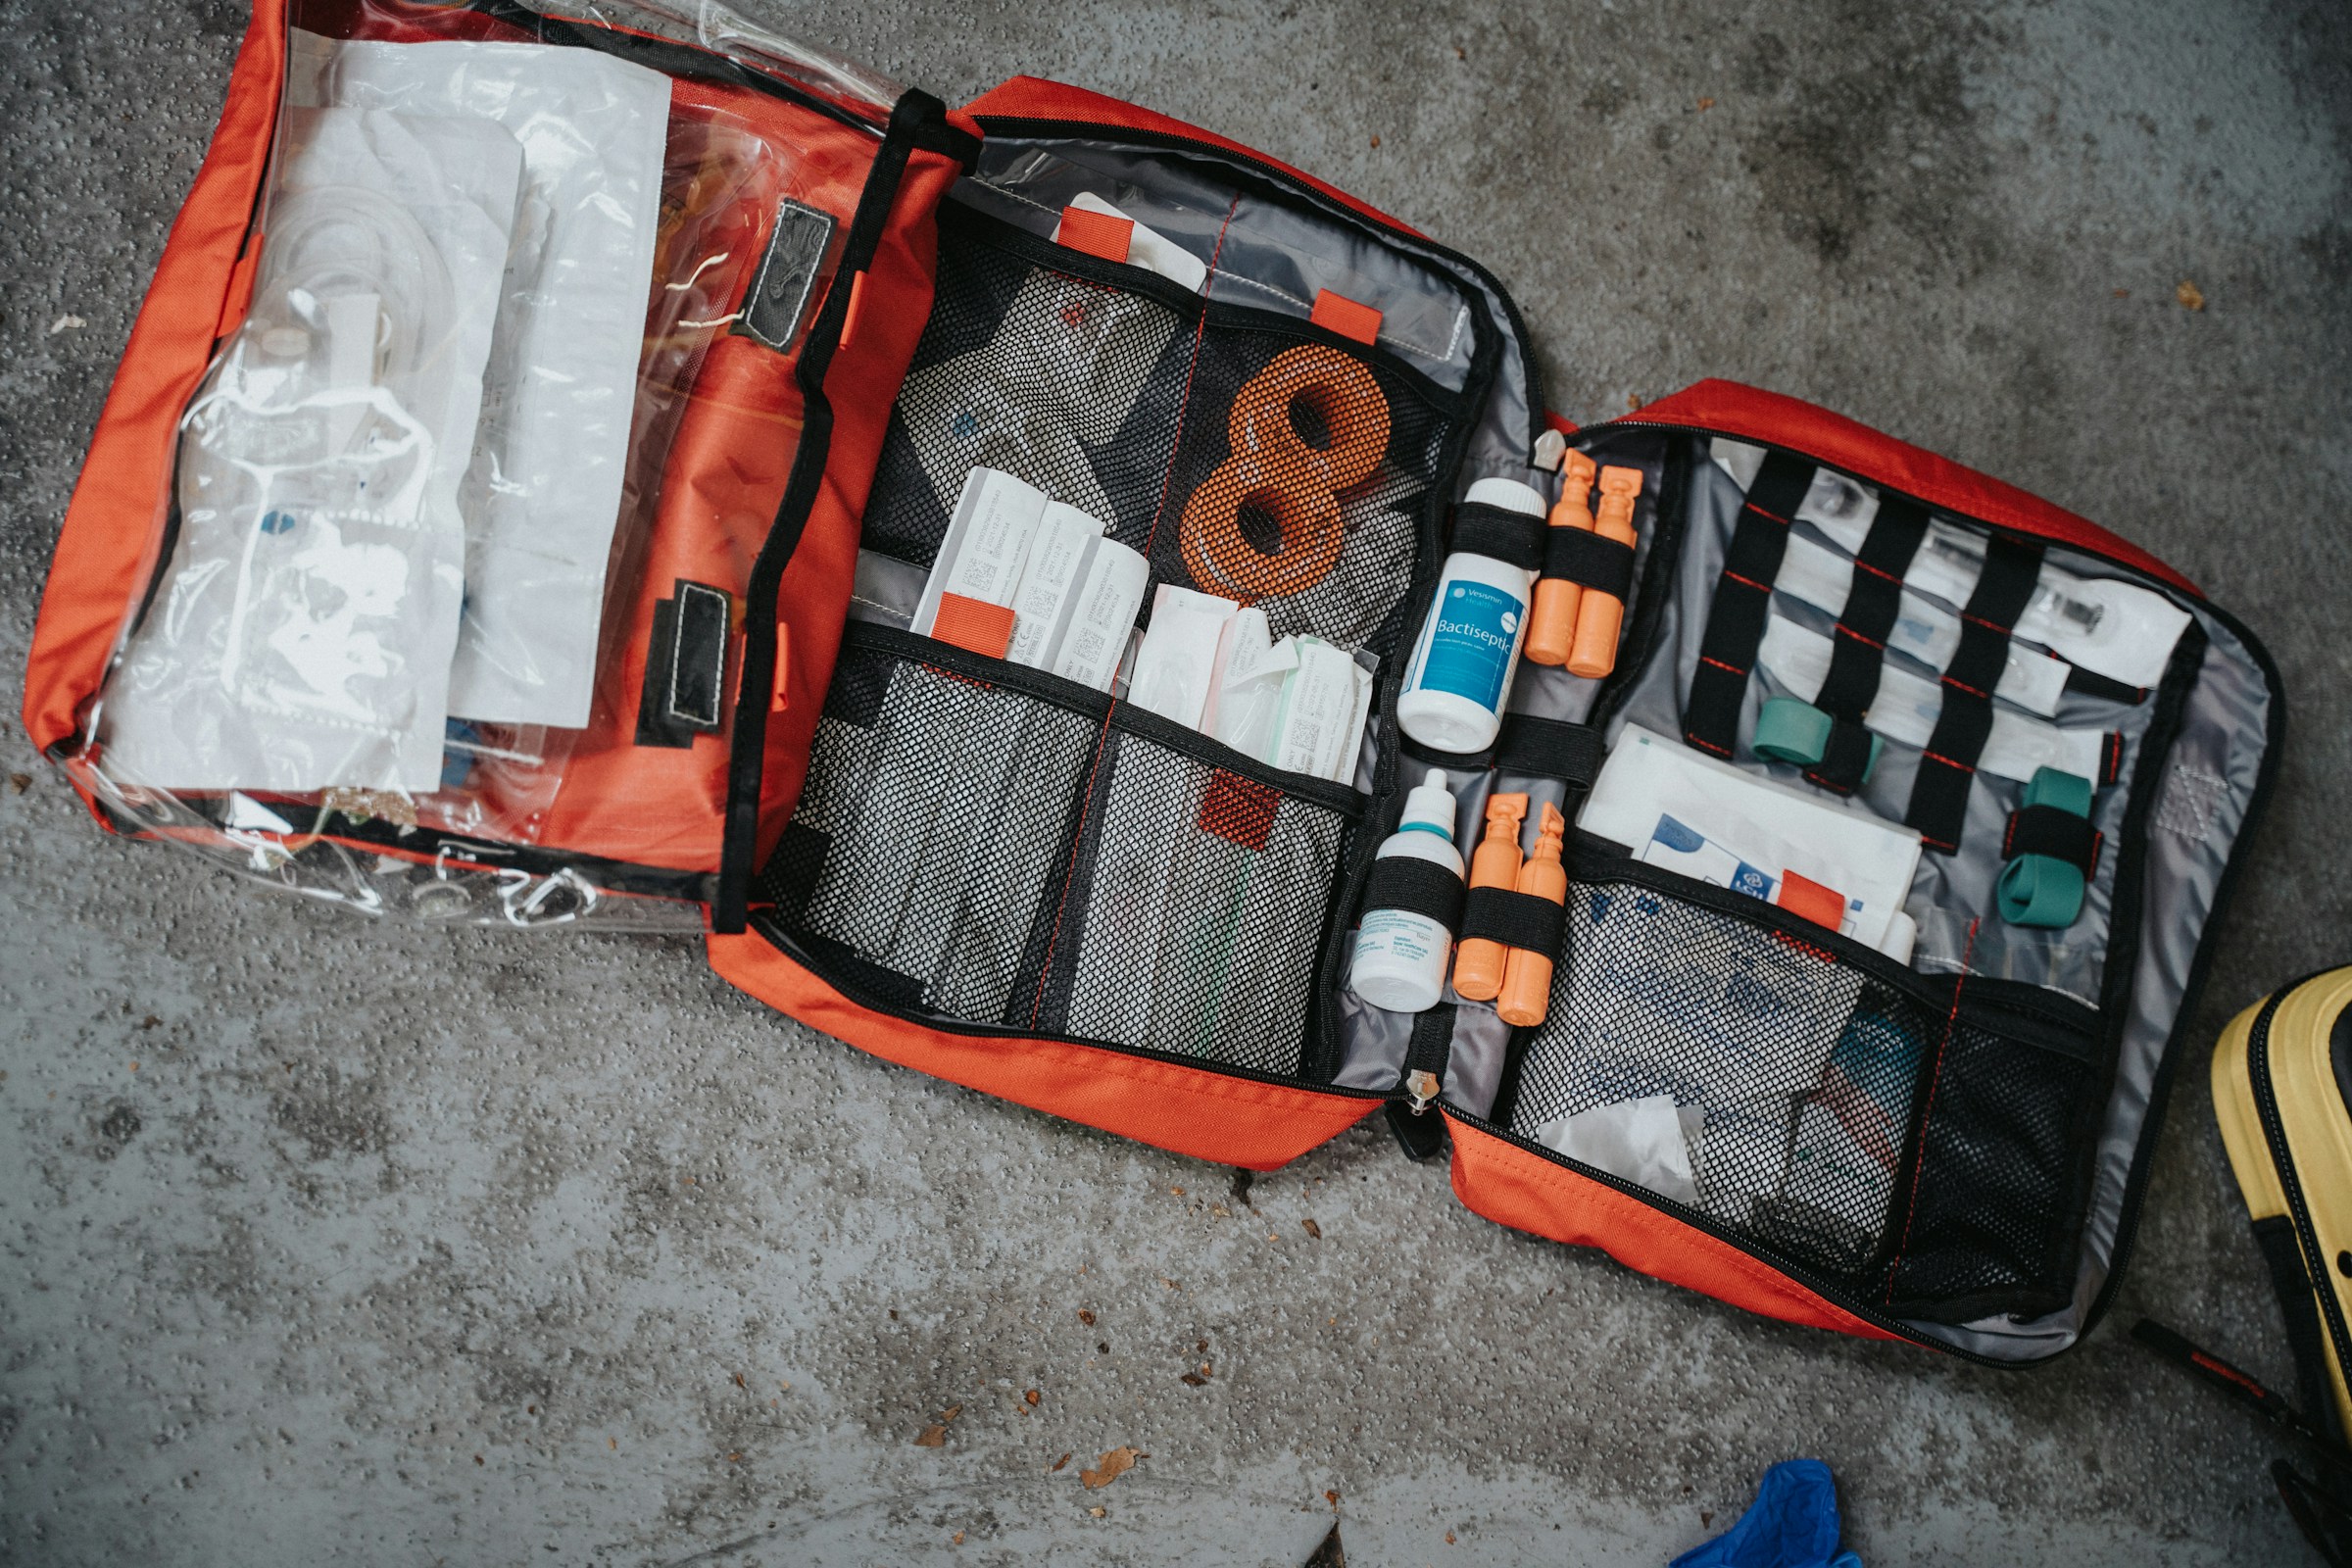 An open first aid kit | Source: Unsplash